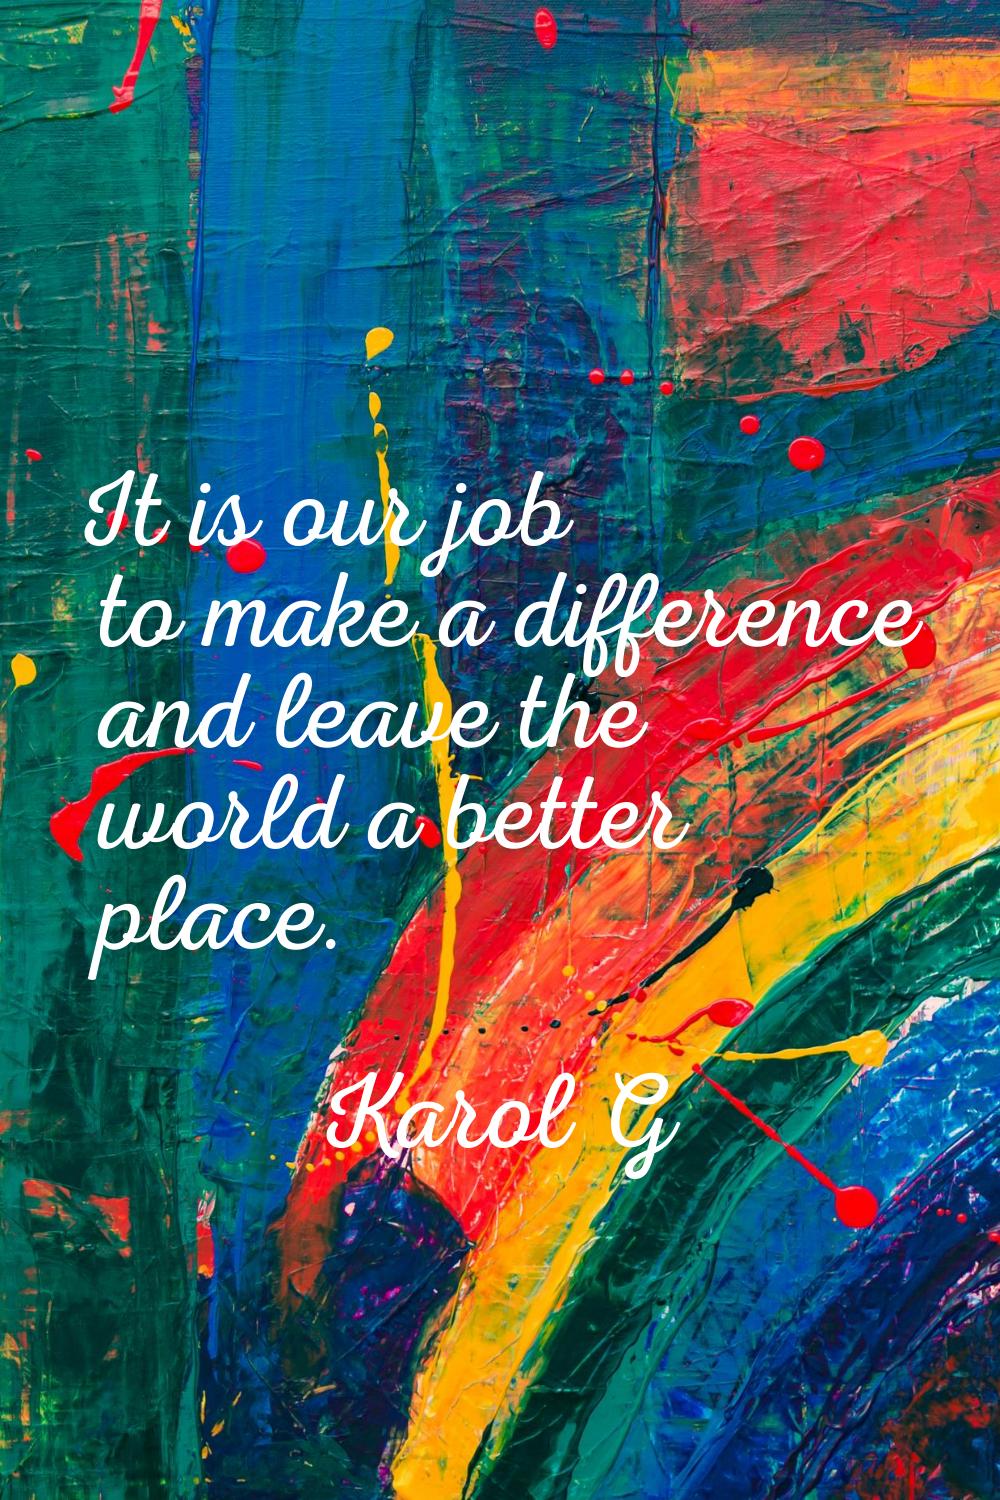 It is our job to make a difference and leave the world a better place.